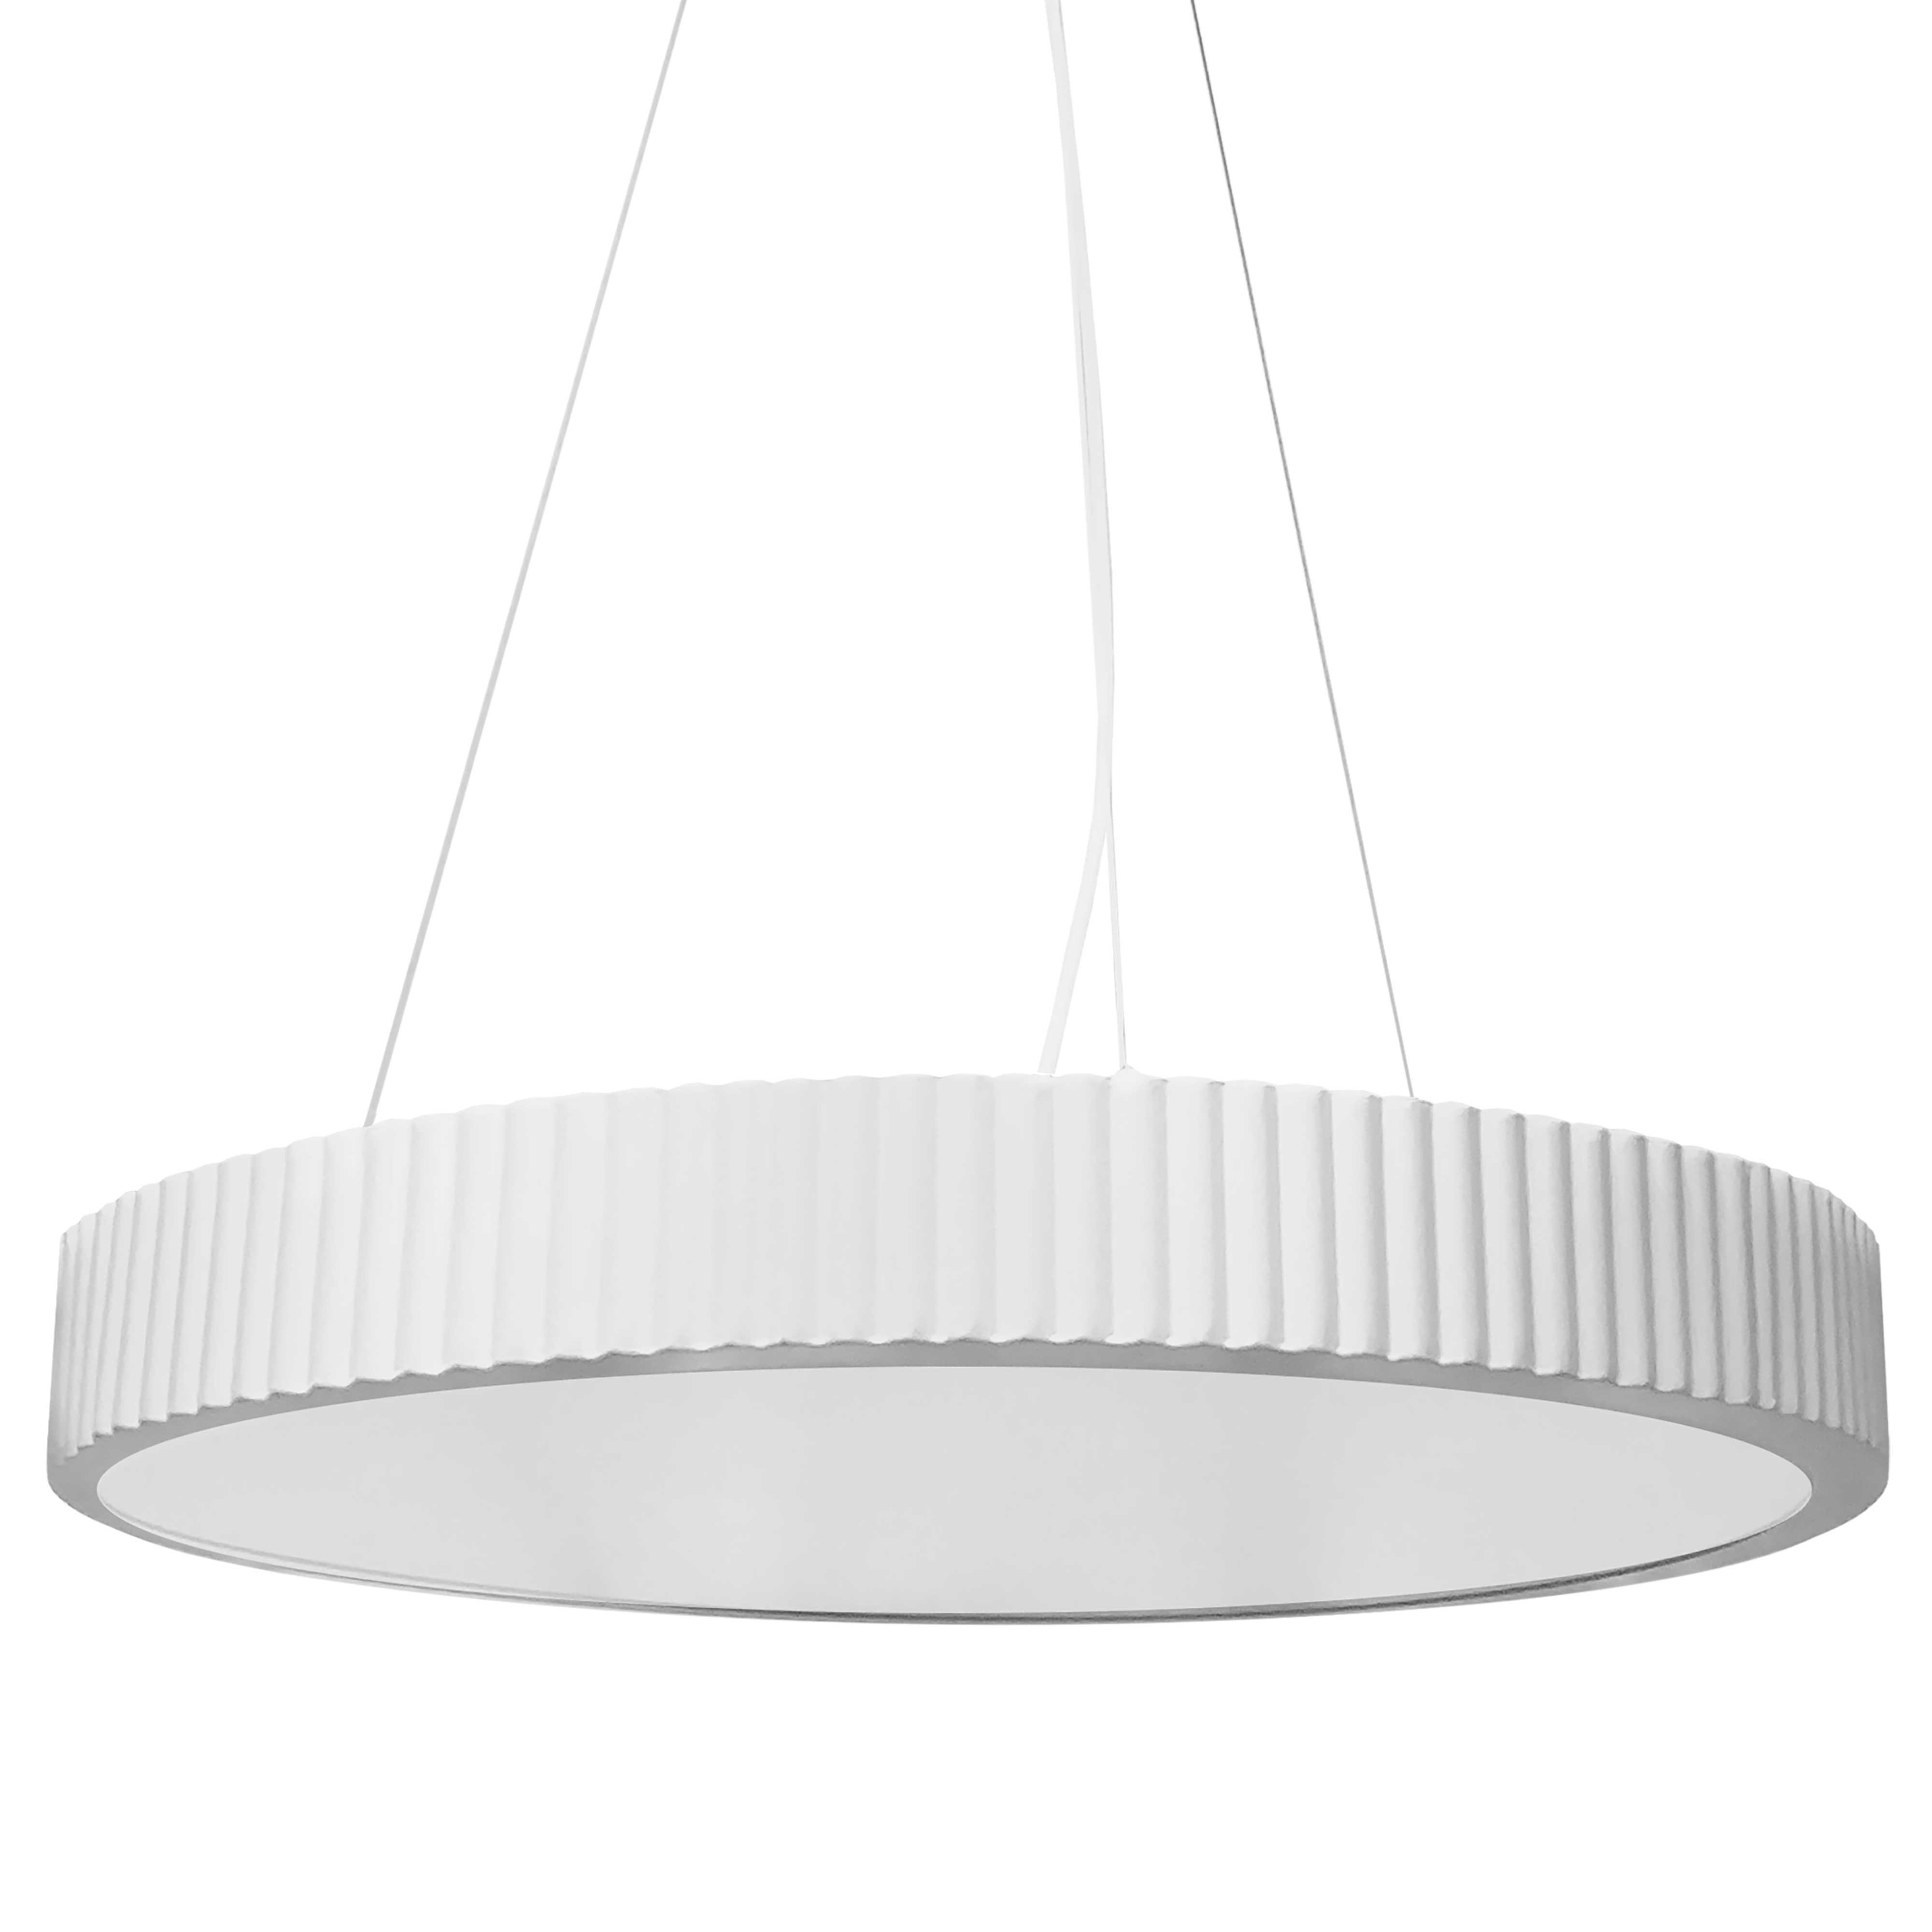 The Nabisco family of lighting takes the cute cut of a cookie and turns it into an element of chic contemporary décor. With flush and pendant options available, the design can work in both small and large spaces. The metal frame features a ridged circle drop in matte black for a subtle textural element. An LED with a white acrylic diffuser along the inside edge softens the glow to a face-friendly luminosity. Its unfussy look and simplified construction will complement mid-century to modern dining or living rooms, and hallways.